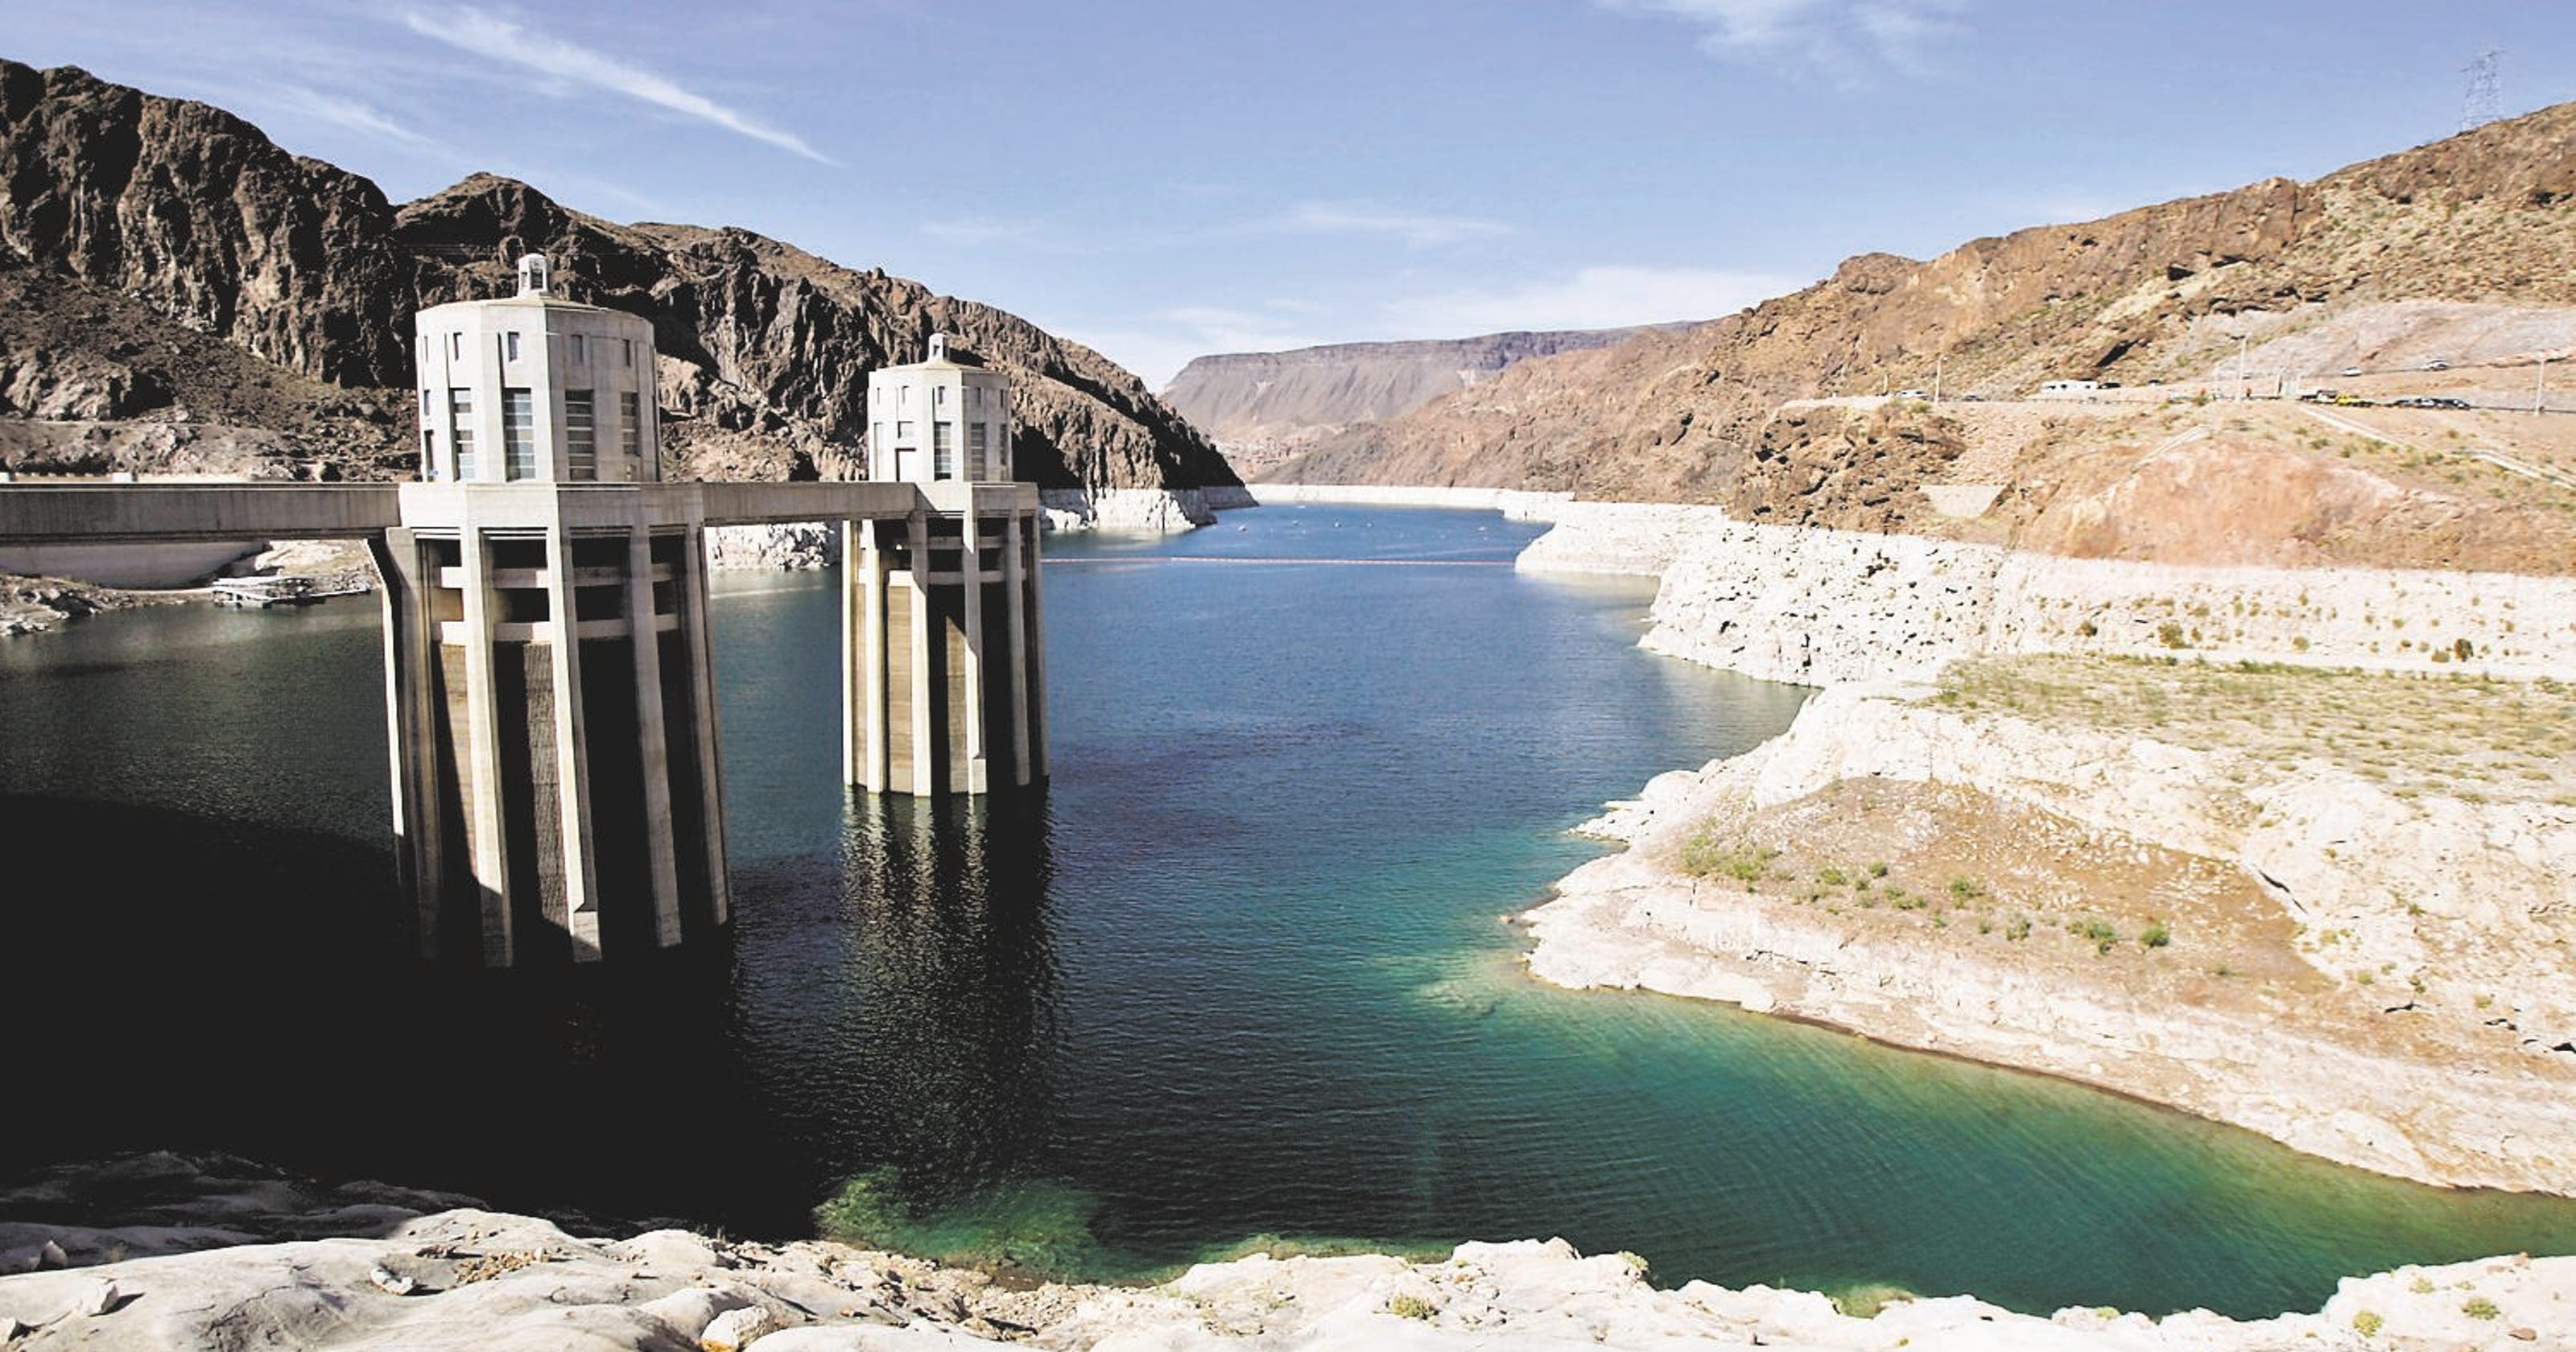 Water level at Lake Mead creates boating hazards